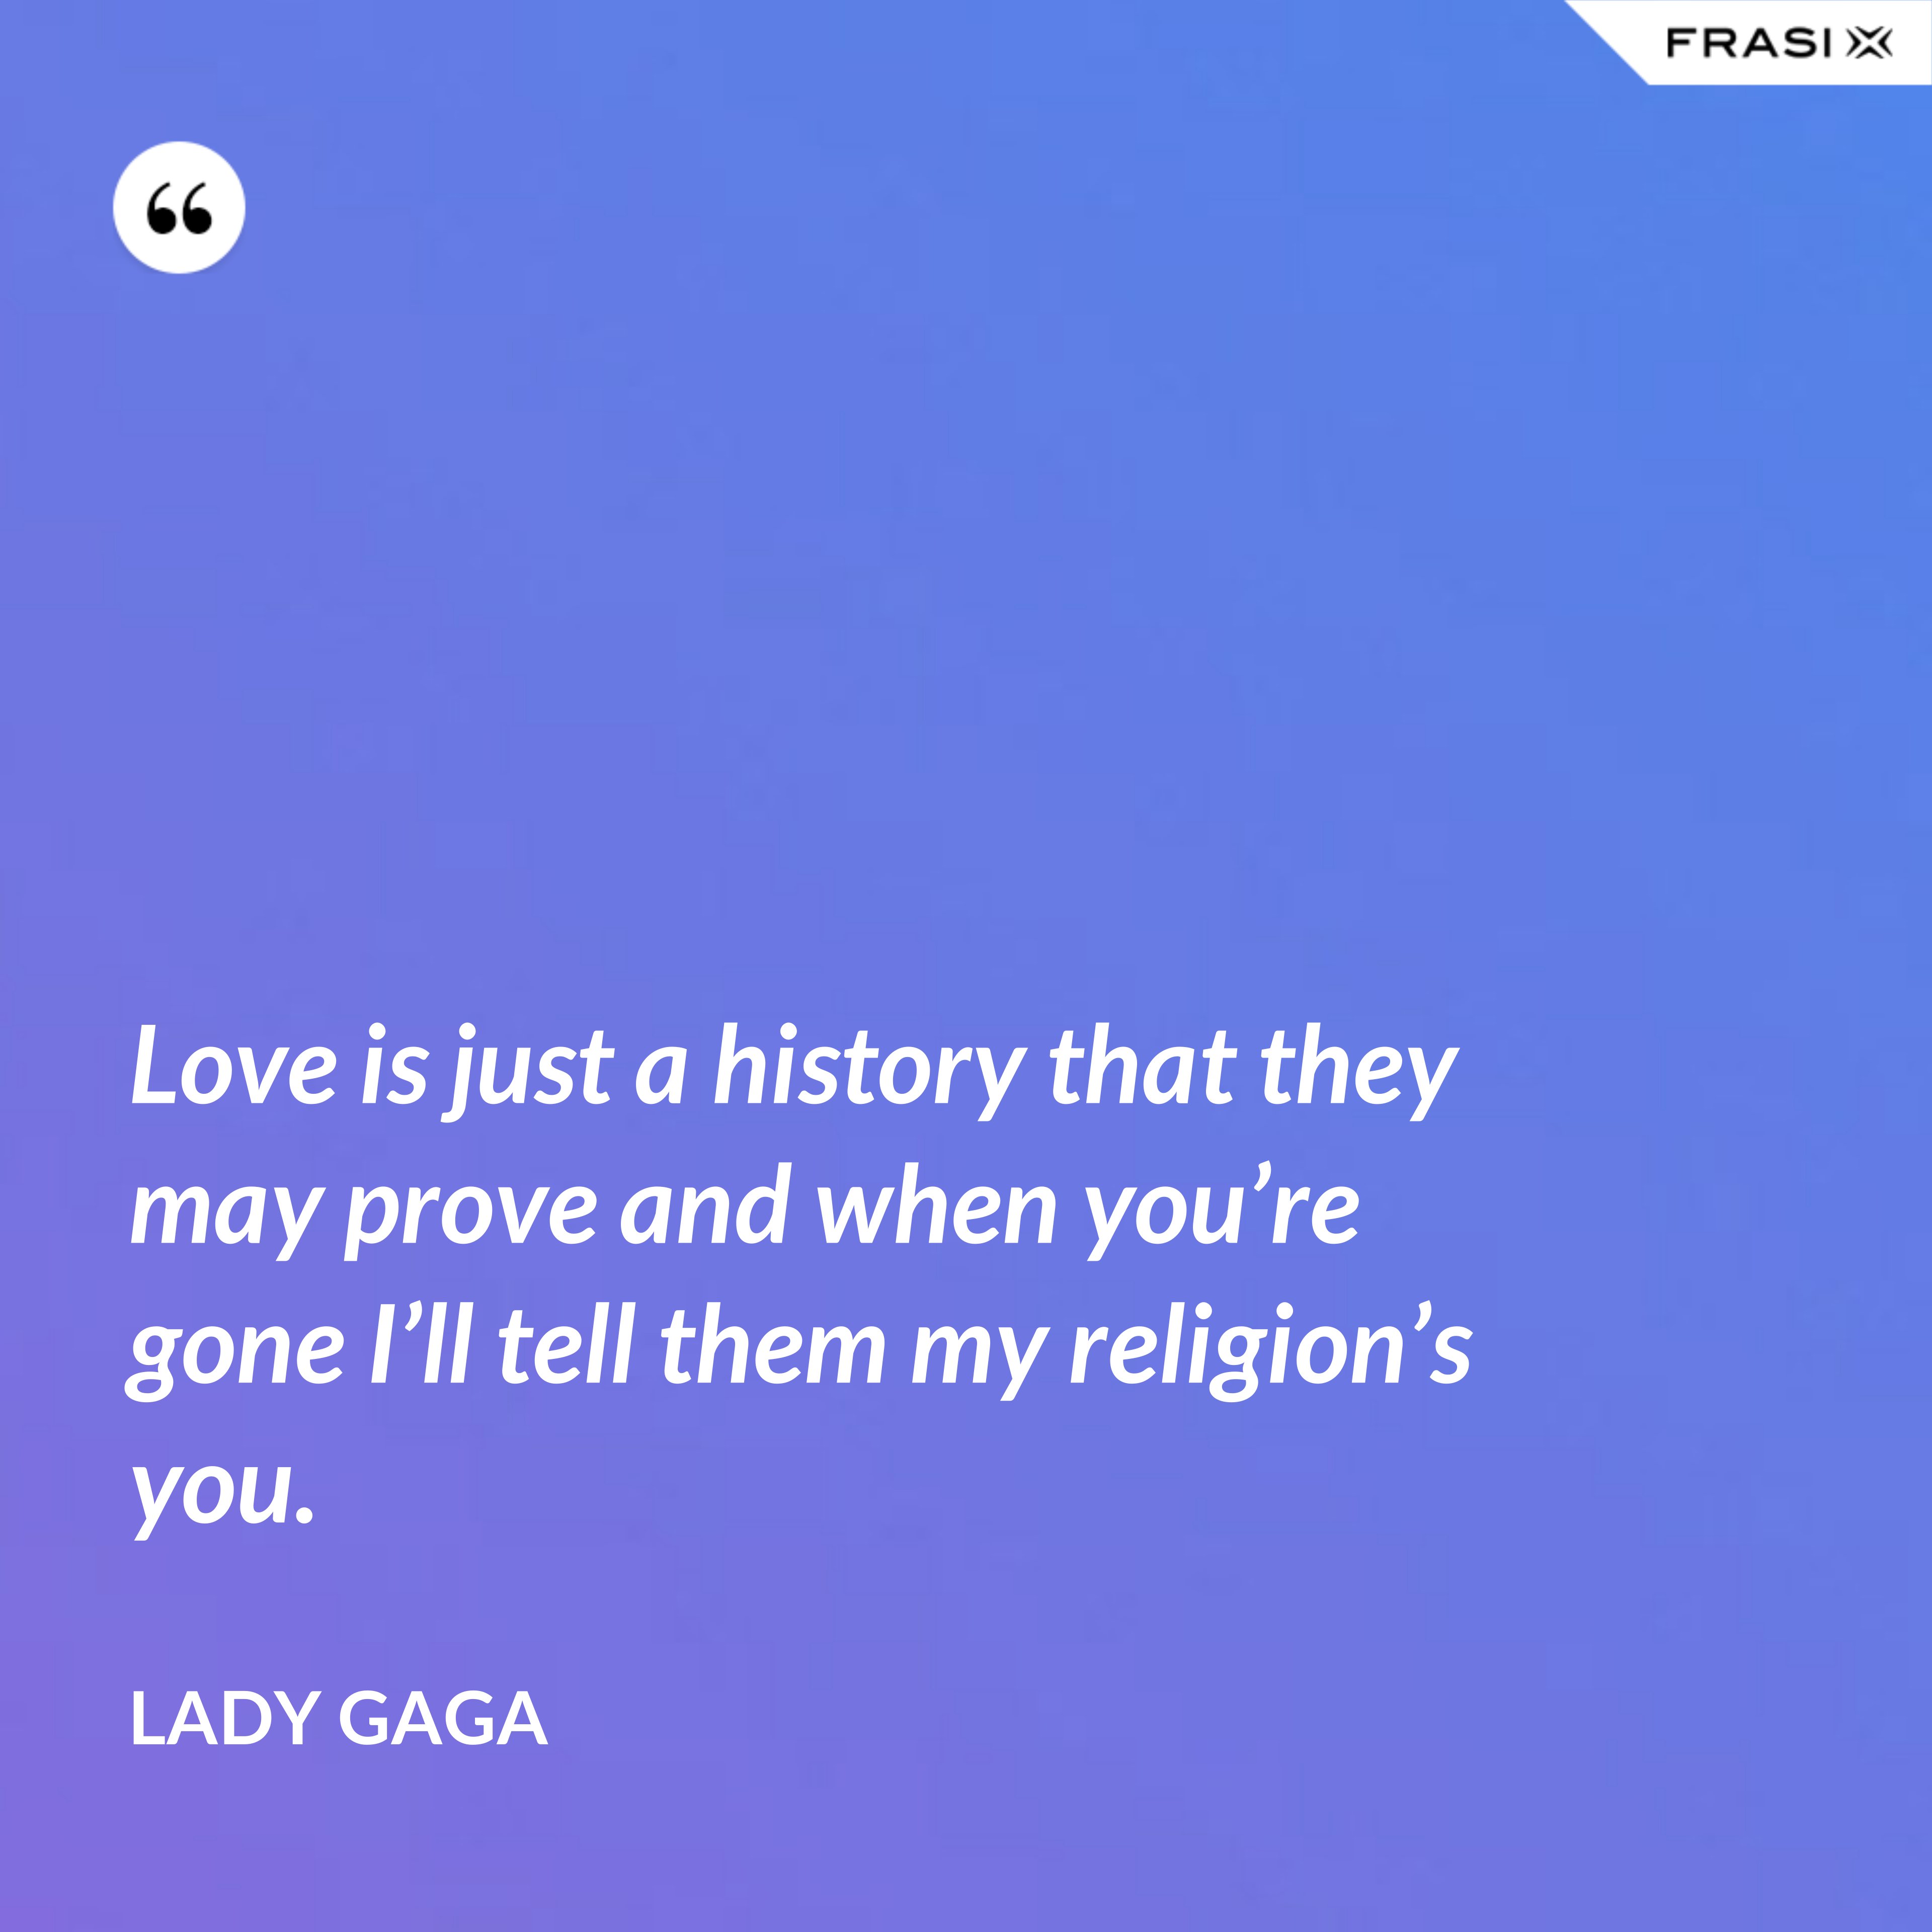 Love is just a history that they may prove and when you’re gone I’ll tell them my religion’s you. - Lady Gaga